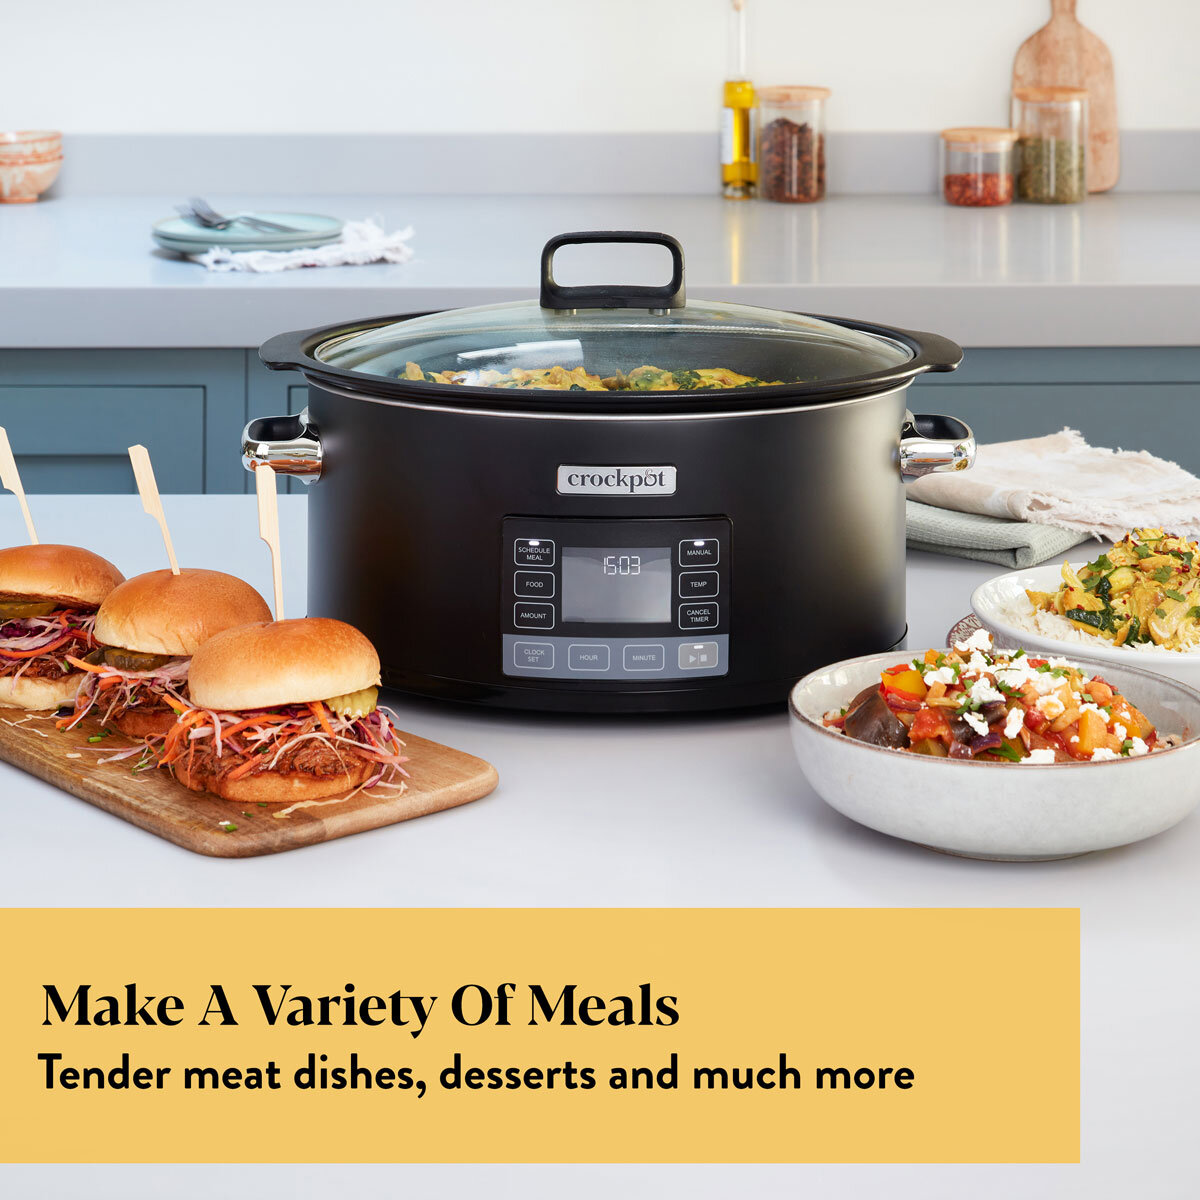 Lifestyle image of crockpot in kitchen with burgers